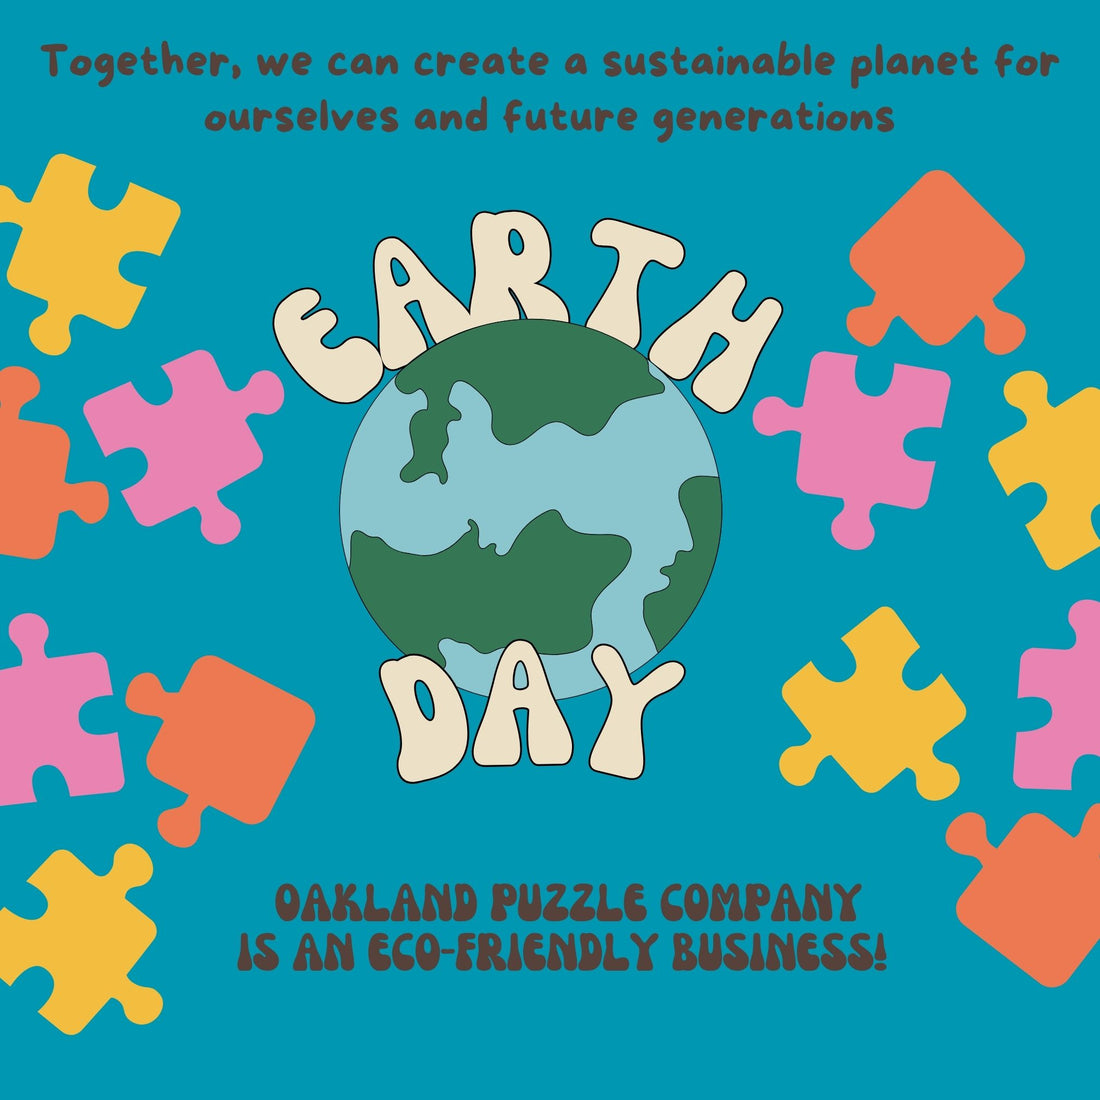 An image of the earth surrounded by puzzle pieces with the words, "Together we can create a sustainable future for ourselves and future generations. Oakland Puzzle Company is an eco-friendly business."